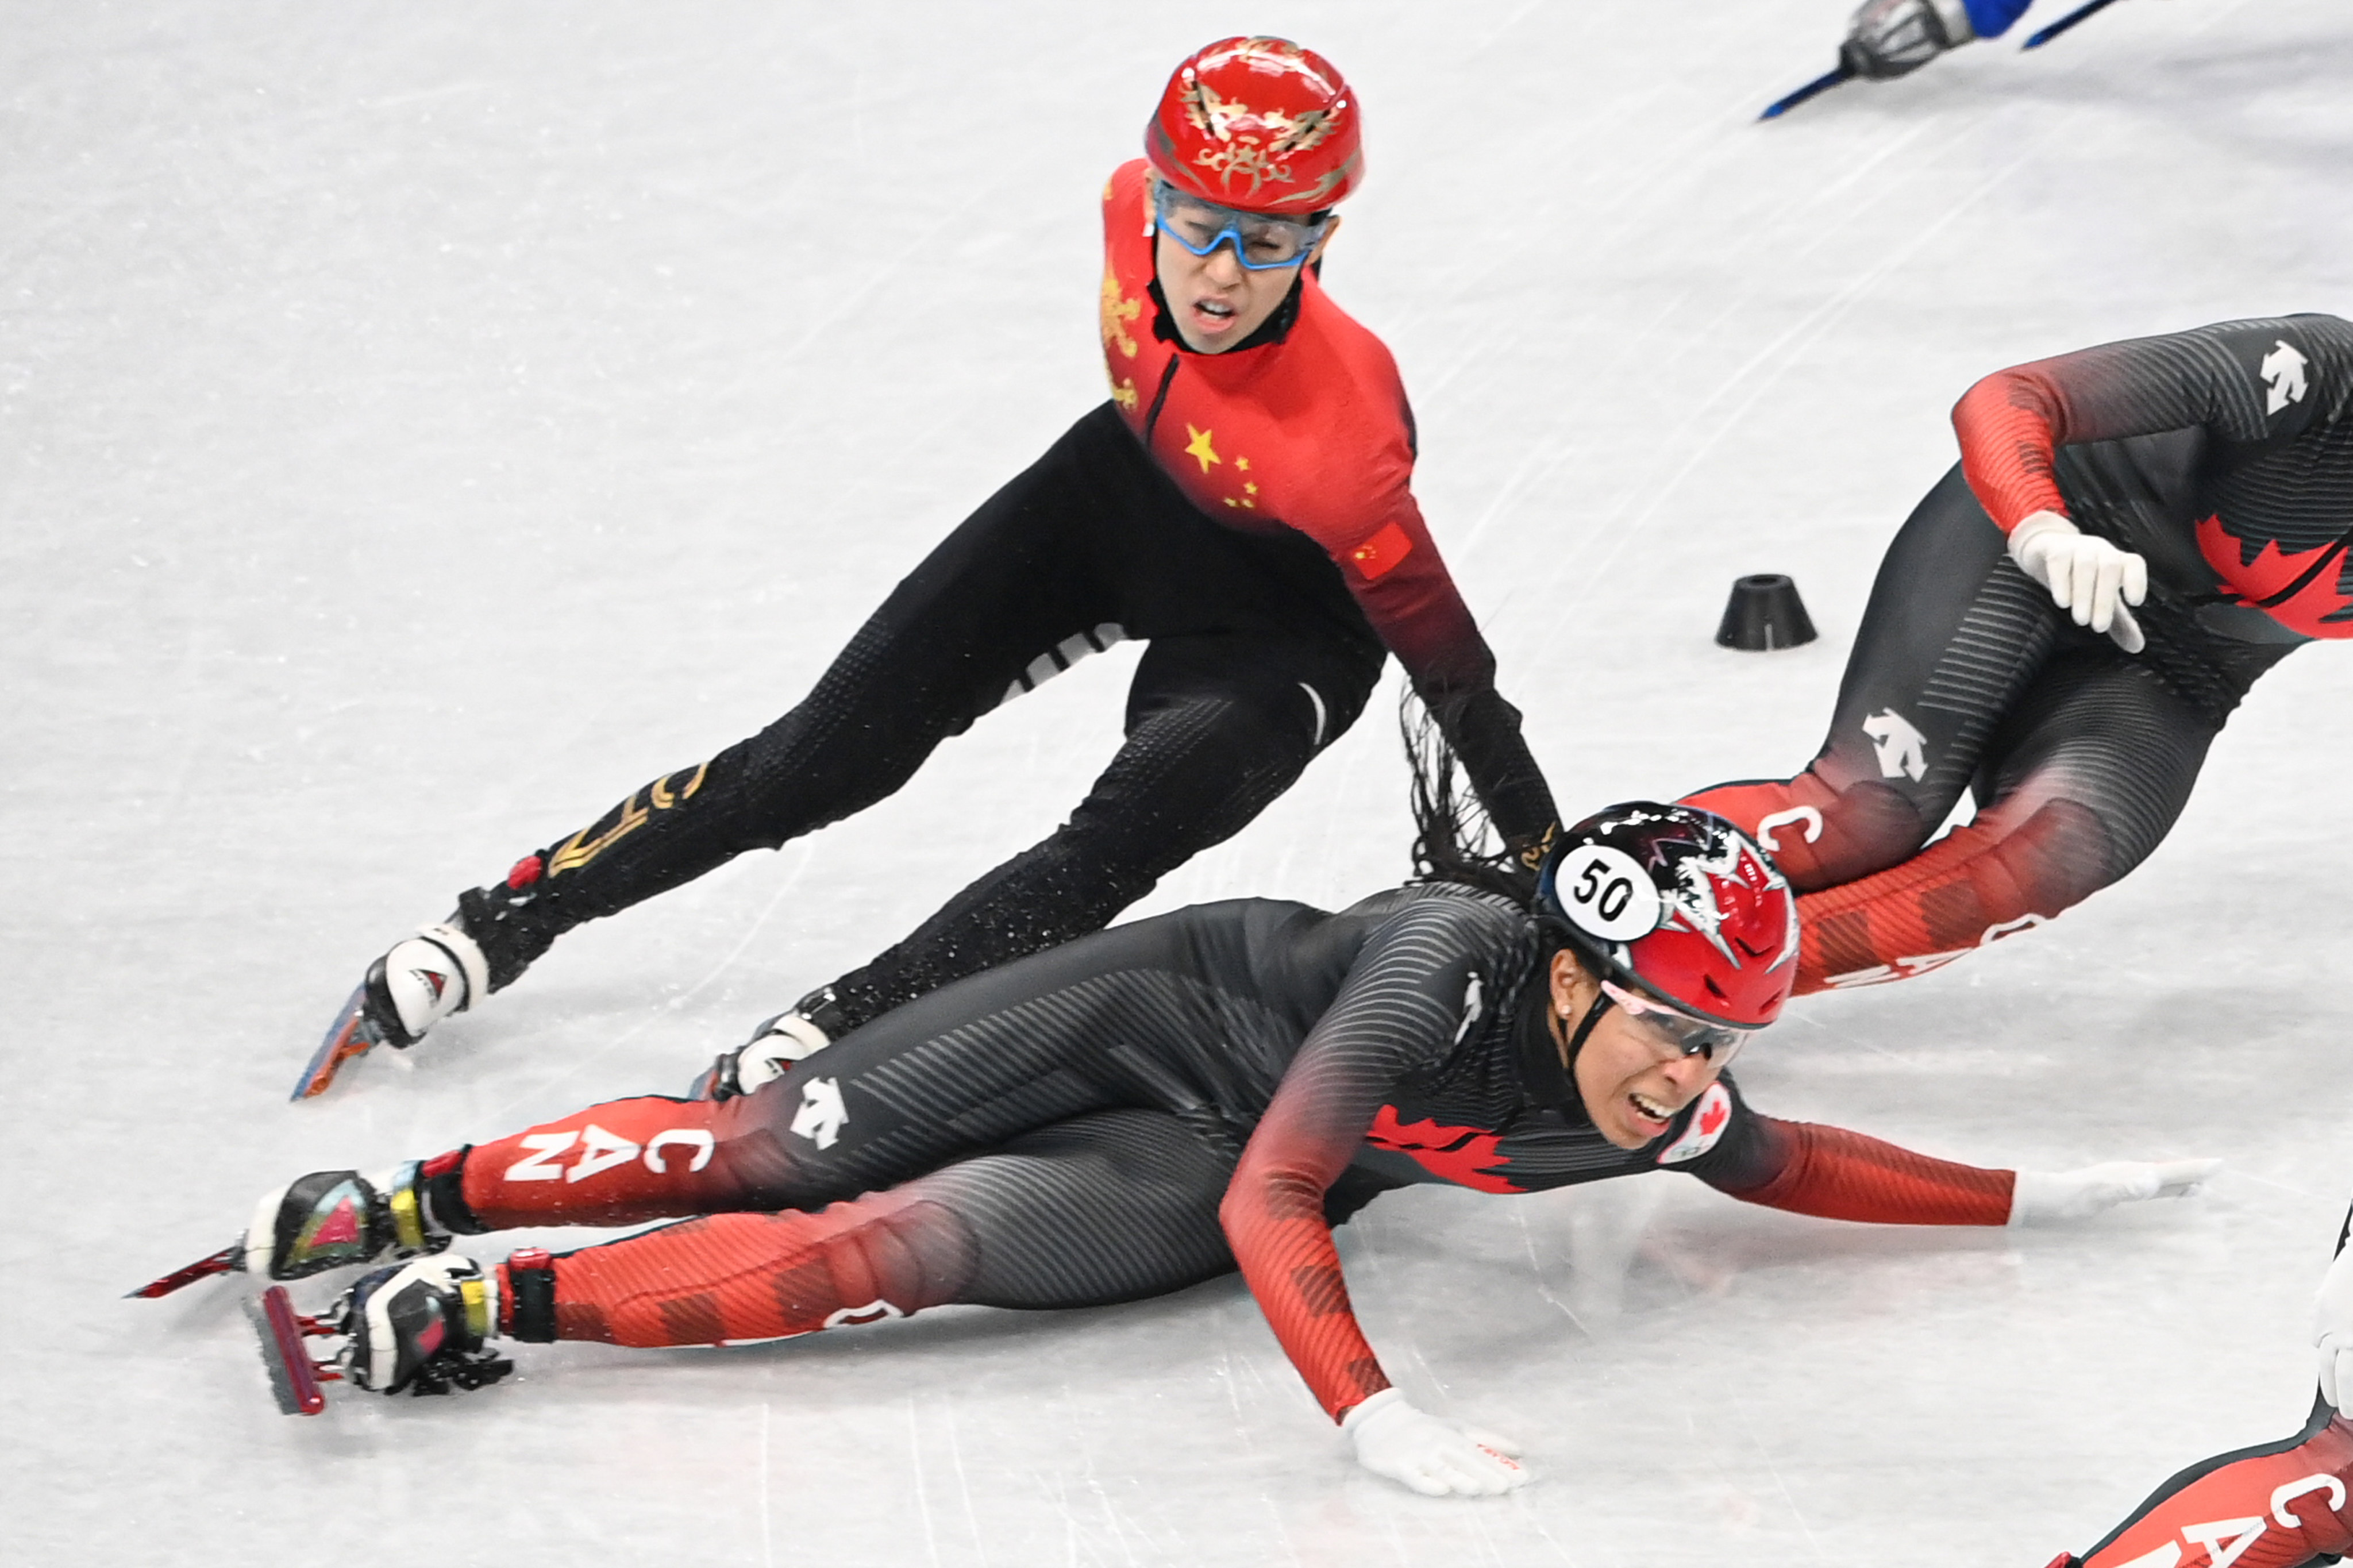 Fan Kexin (top) of China and Alyson Charles of Canada fall onto the rink during the women’s 500m quarter-finals. Photo: Xinhua/Huang Zongzhi